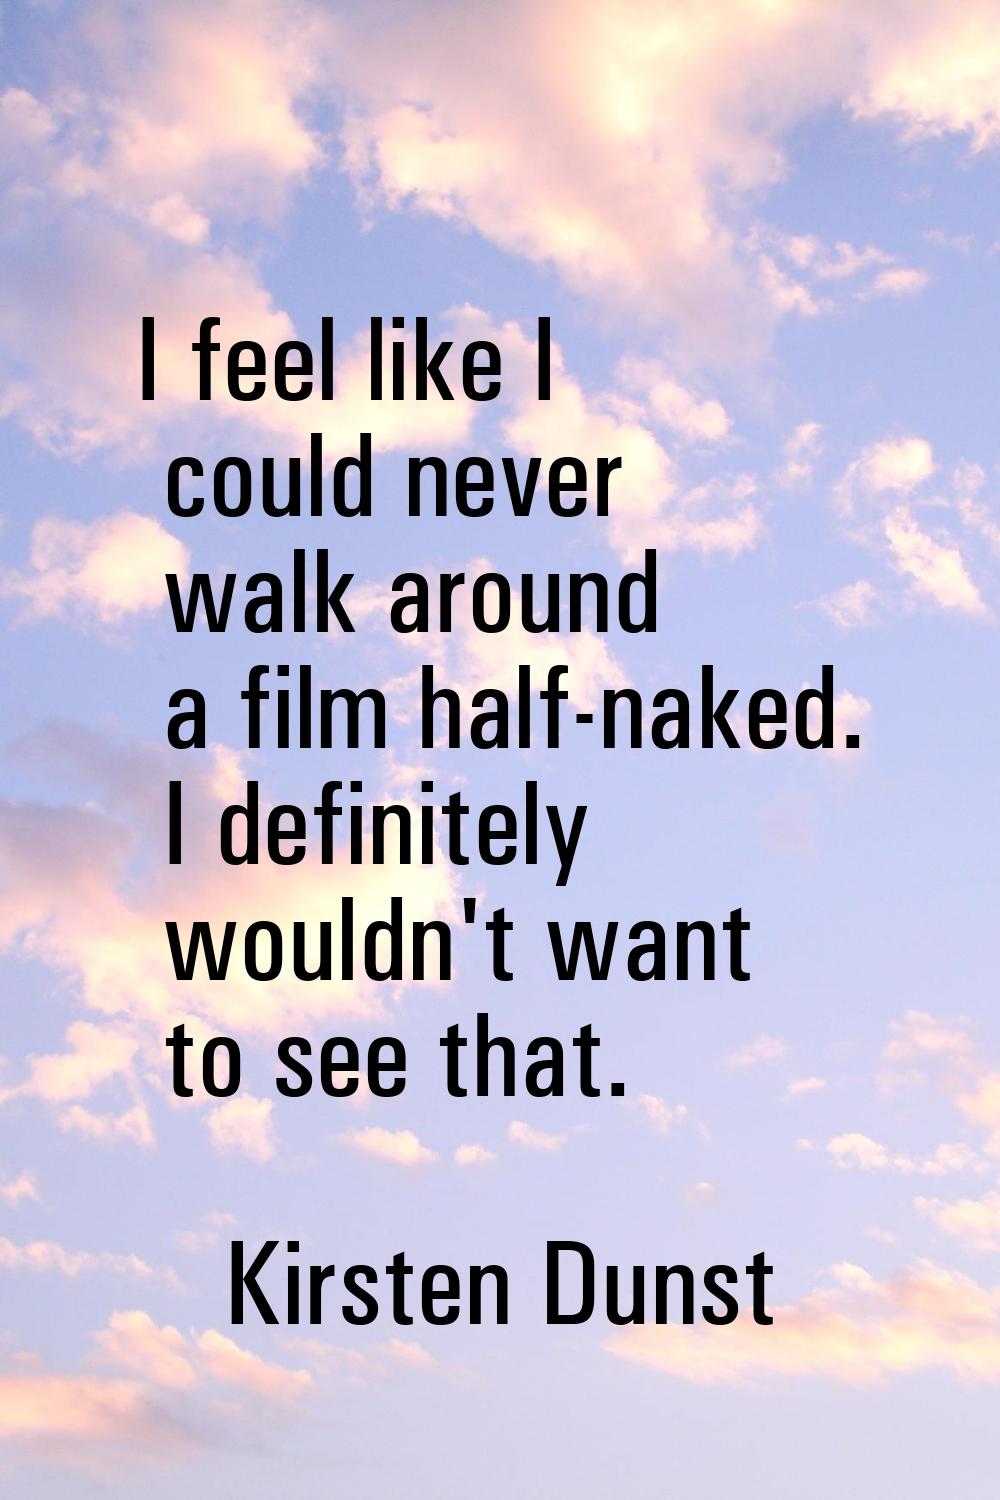 I feel like I could never walk around a film half-naked. I definitely wouldn't want to see that.